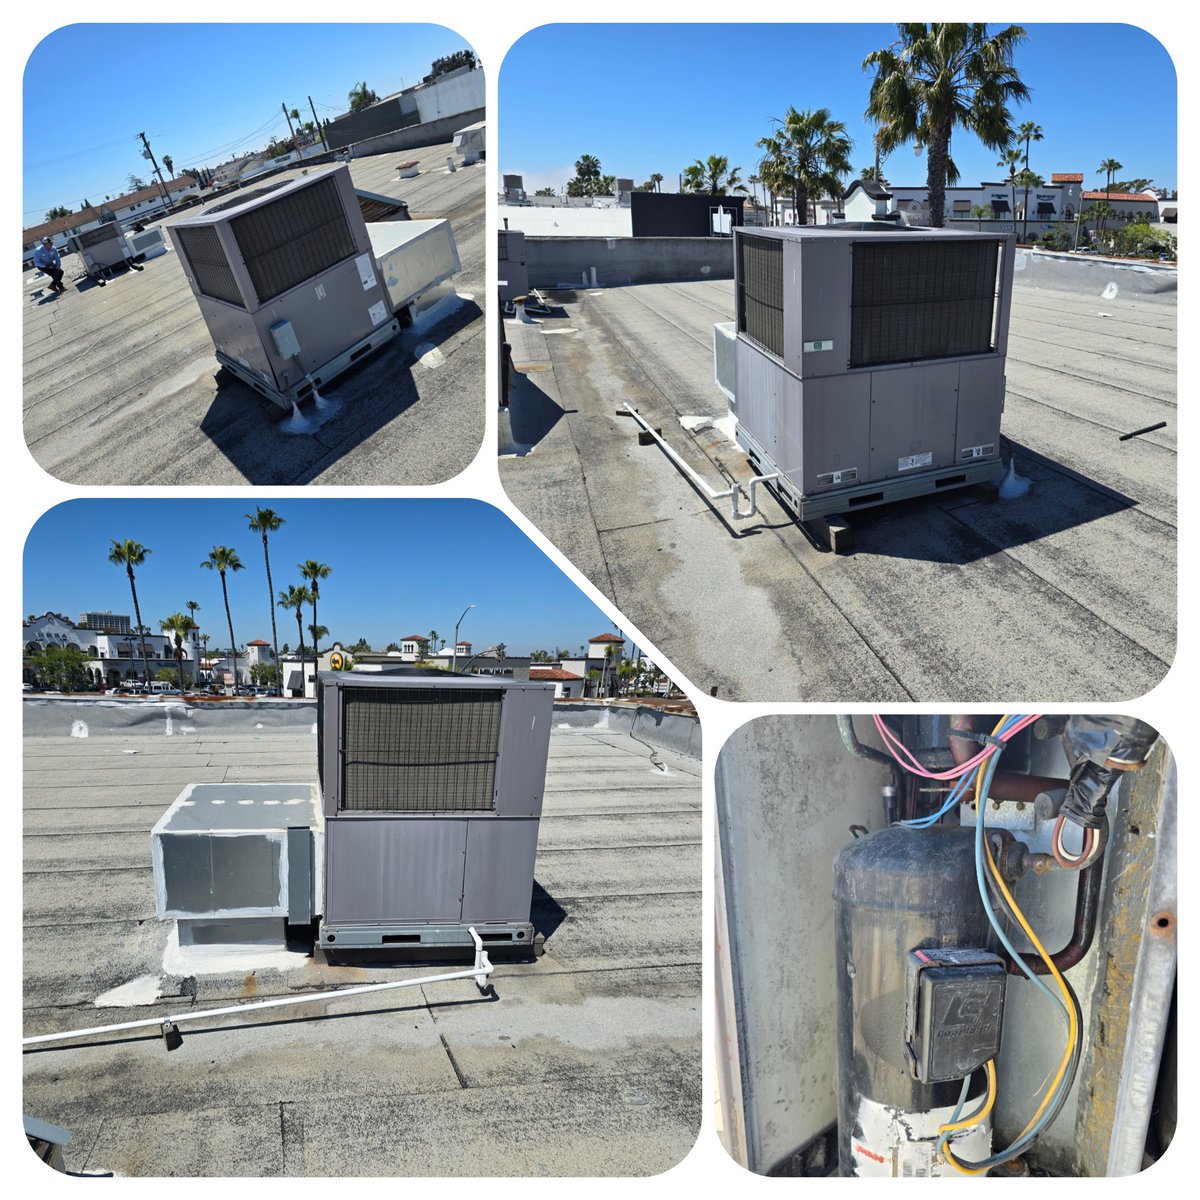 Is your Air Conditioning ready for summer of 2024? Don't delay, call the guys at California Air Conditioning Systems today!

#losangeles #culvercity #vernon #commerce #HVAC #californiaac #lomita #harborcity #sanpedro #downey